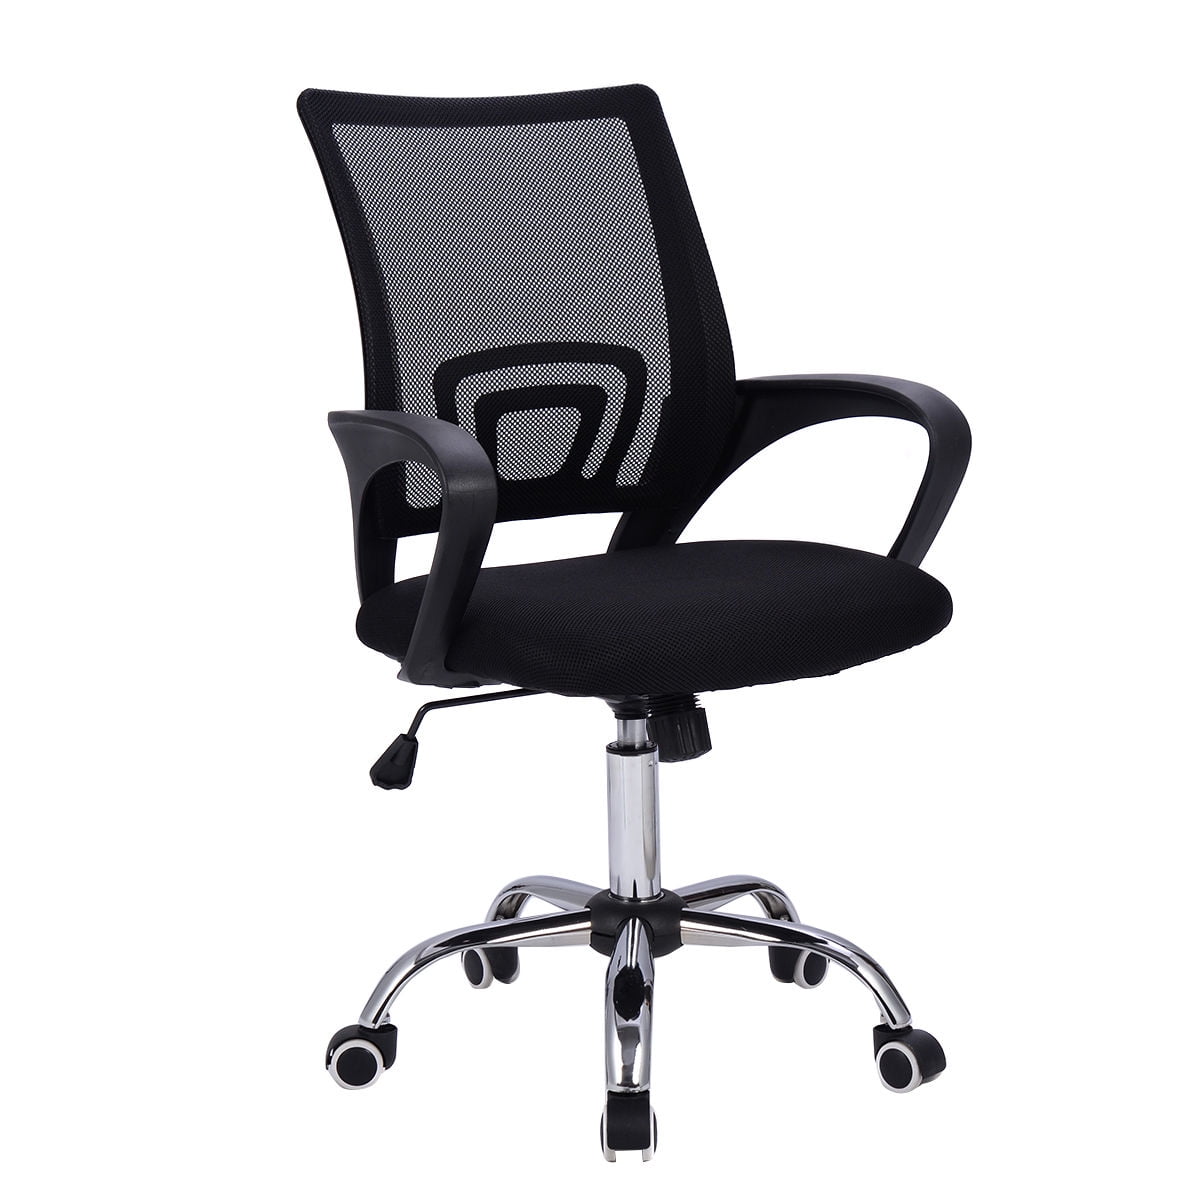 Computer Chair,computer gaming chair,computer chair walmart,best computer chair,computer desk chair,how to reupholster a computer rolling chair,what to look for in a computer chair,why does my computer chair keep sinking,how to raise computer chair height,how to stop computer chair from going down